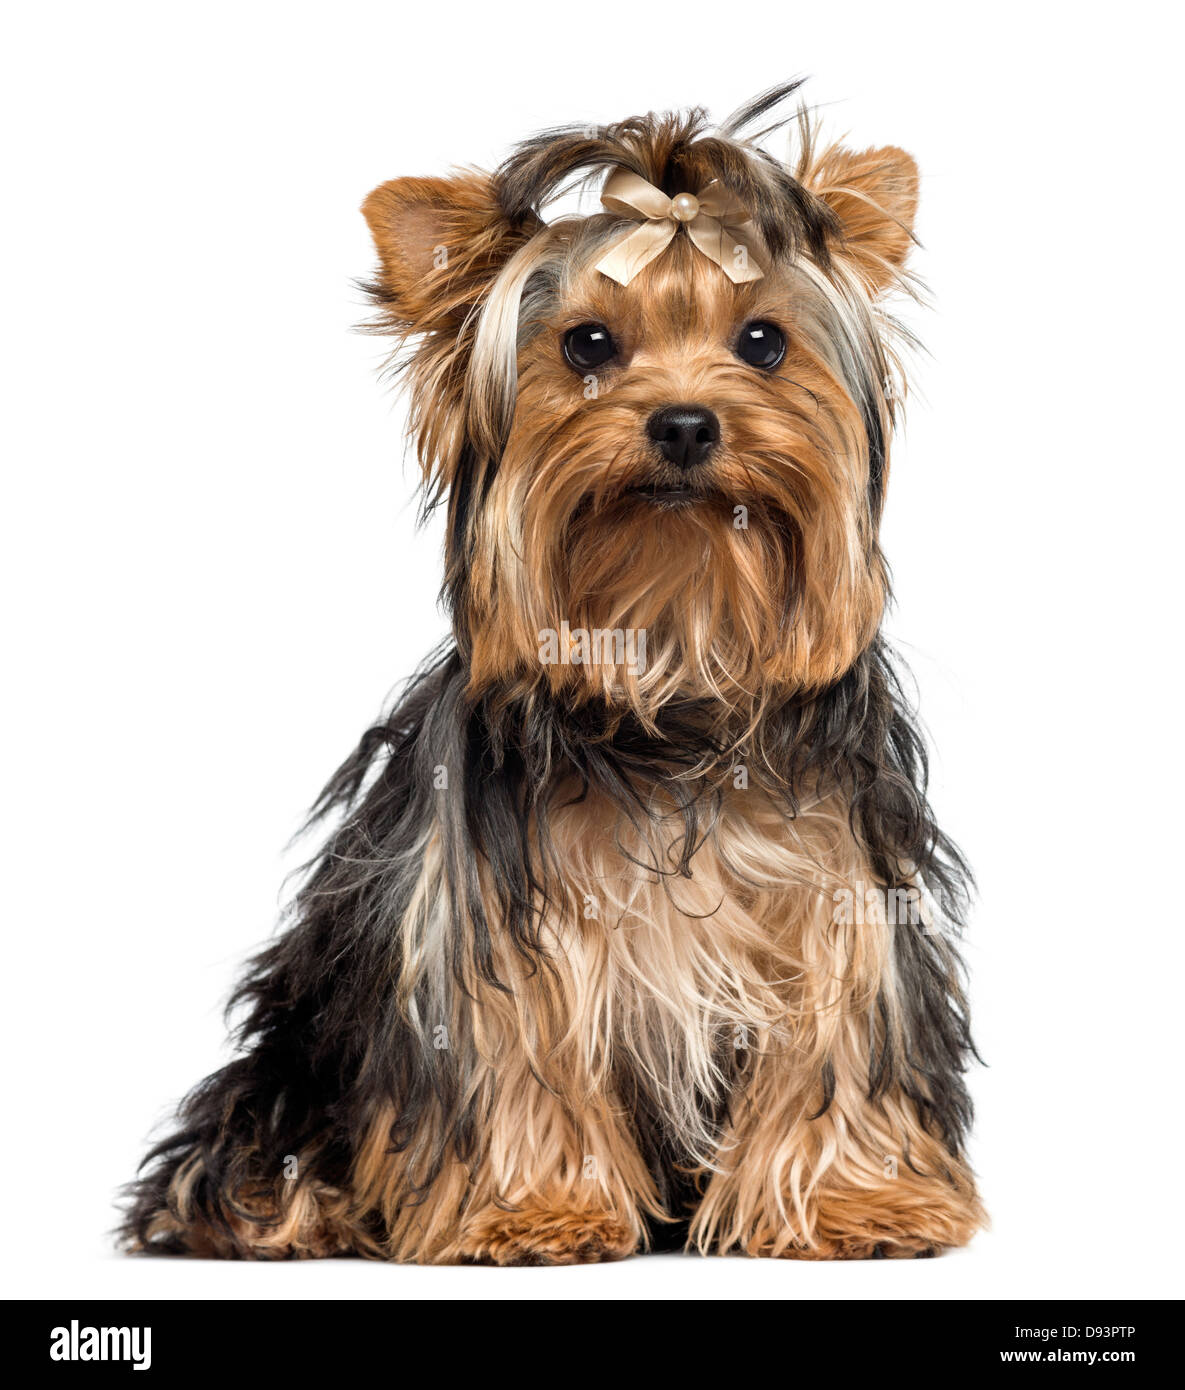 Yorkshire Terrier wearing a bow, 7 months old, against white background Stock Photo